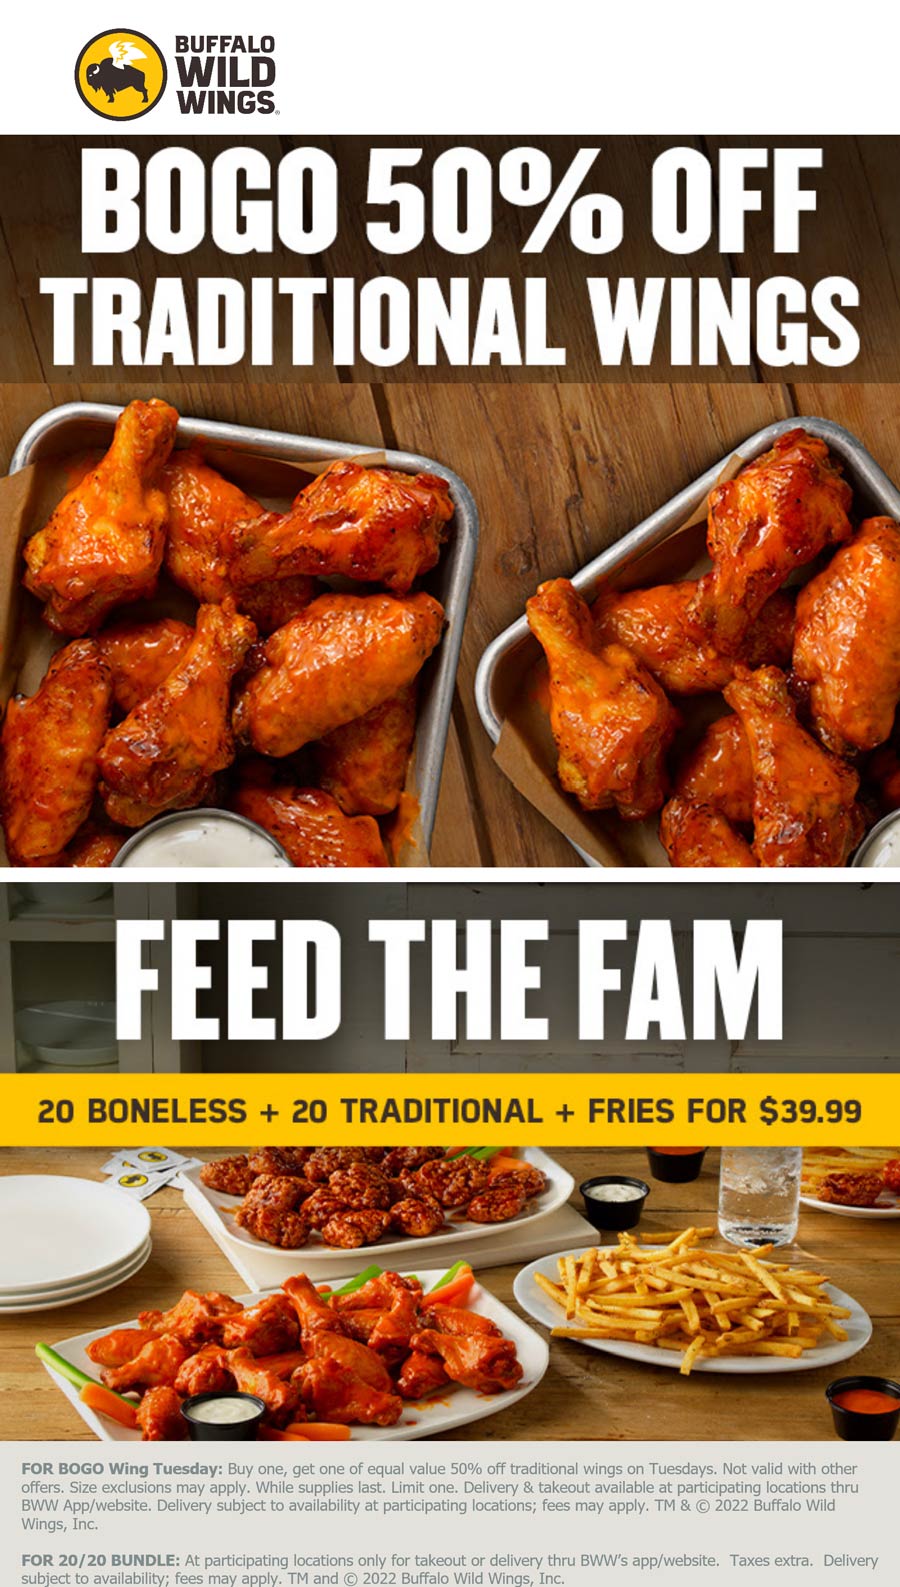 Buffalo Wild Wings restaurants Coupon  Second order of chicken wings 50% off today at Buffalo Wild Wings #buffalowildwings 